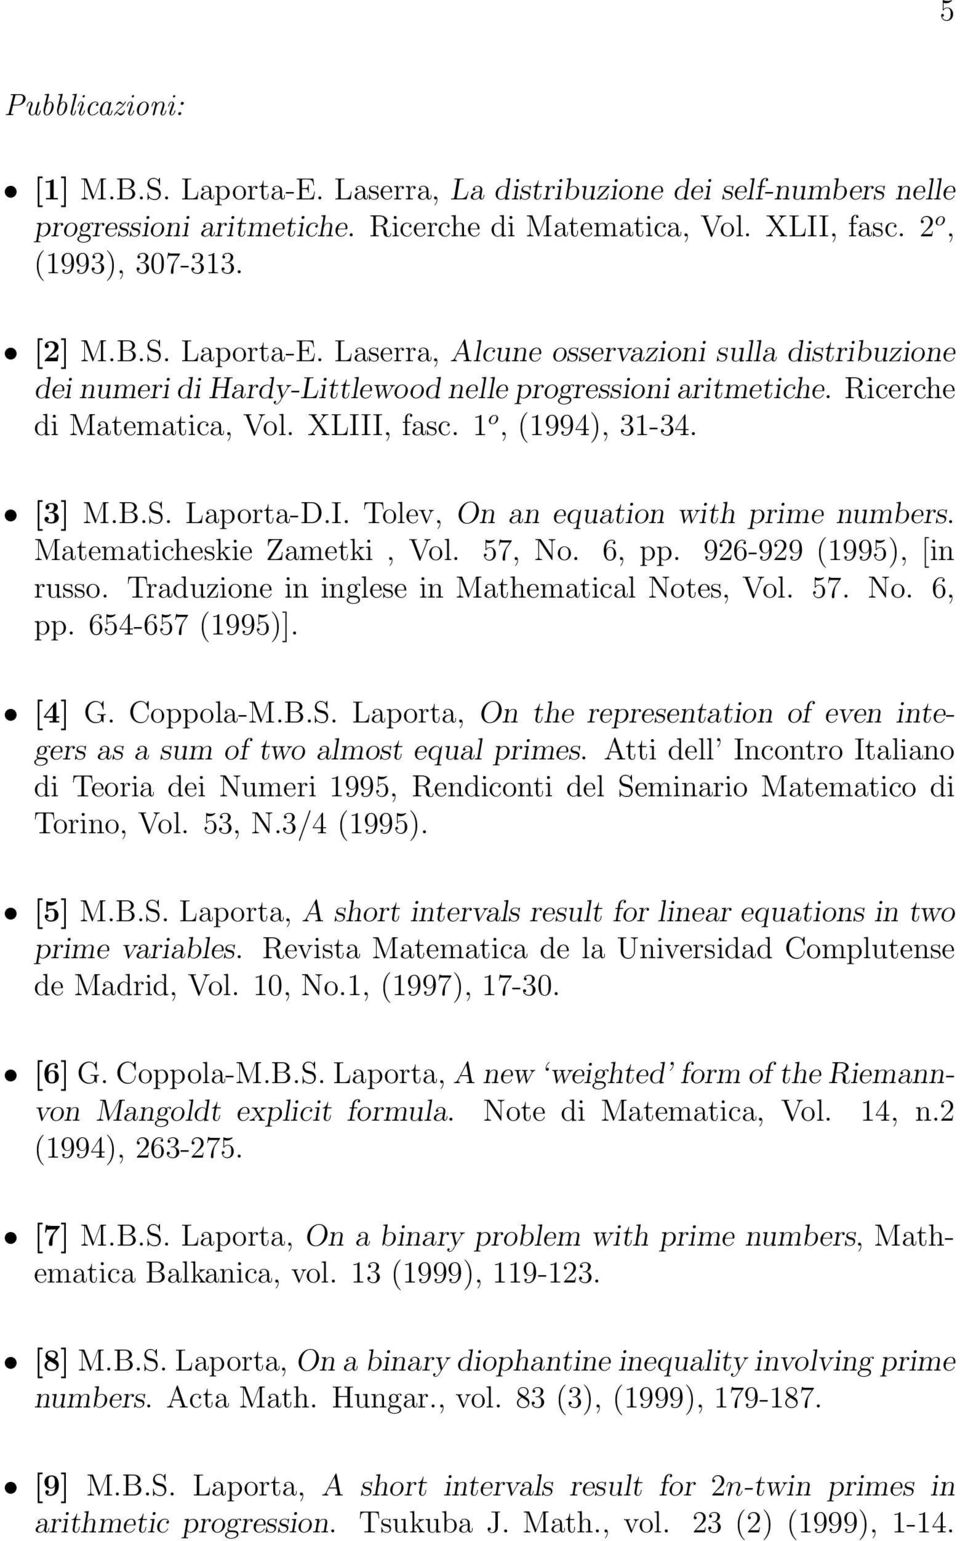 Traduzione in inglese in Mathematical Notes, Vol. 57. No. 6, pp. 654-657 (1995)]. [4] G. Coppola-M.B.S. Laporta, On the representation of even integers as a sum of two almost equal primes.